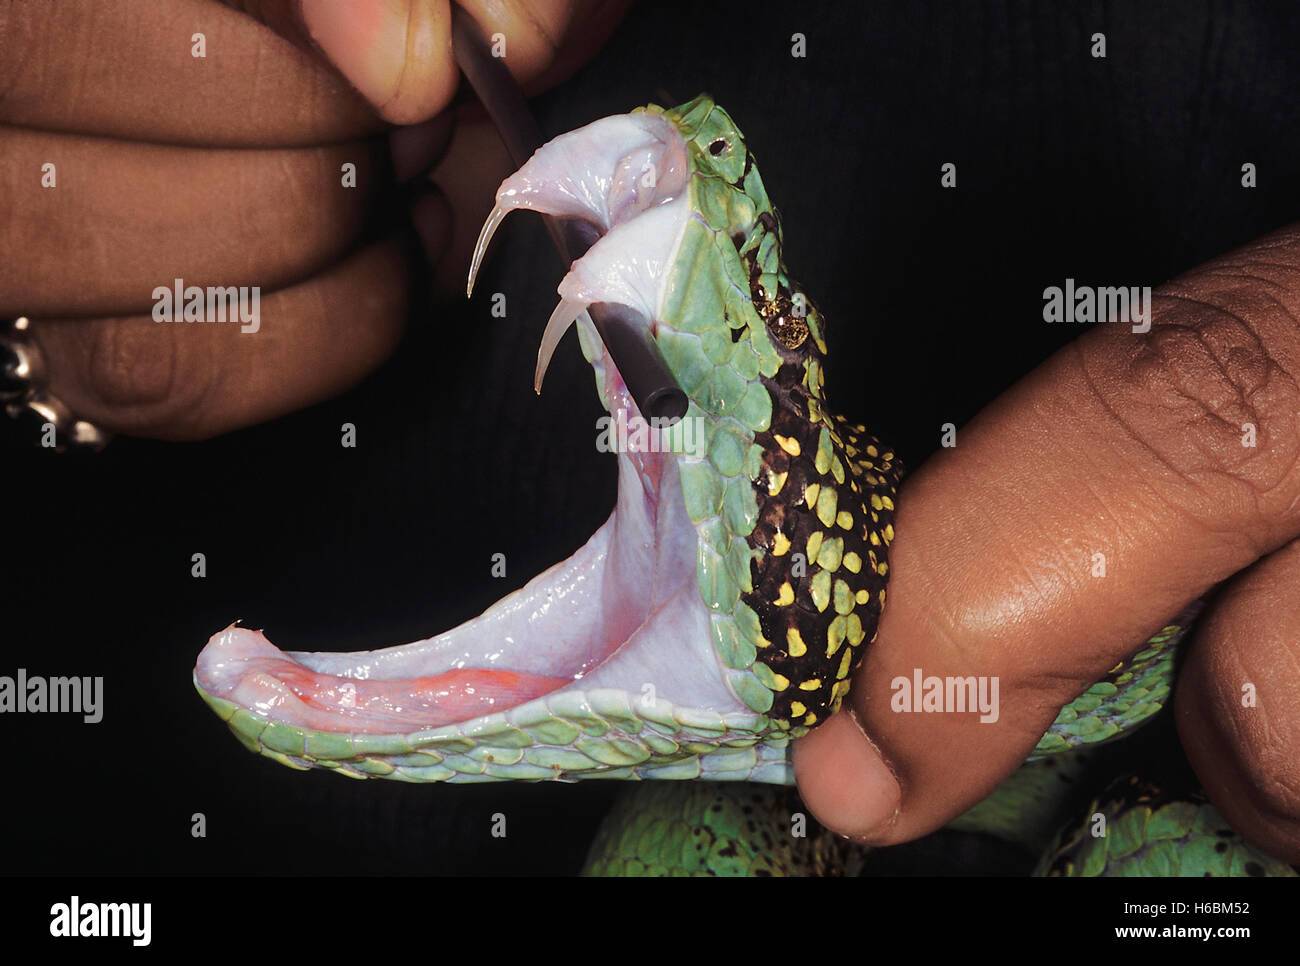 Trimeresurus Malabaricus. Malabar Pit Viper. A close up of the head of this snake with the mouth open showing the exposed fangs. Stock Photo